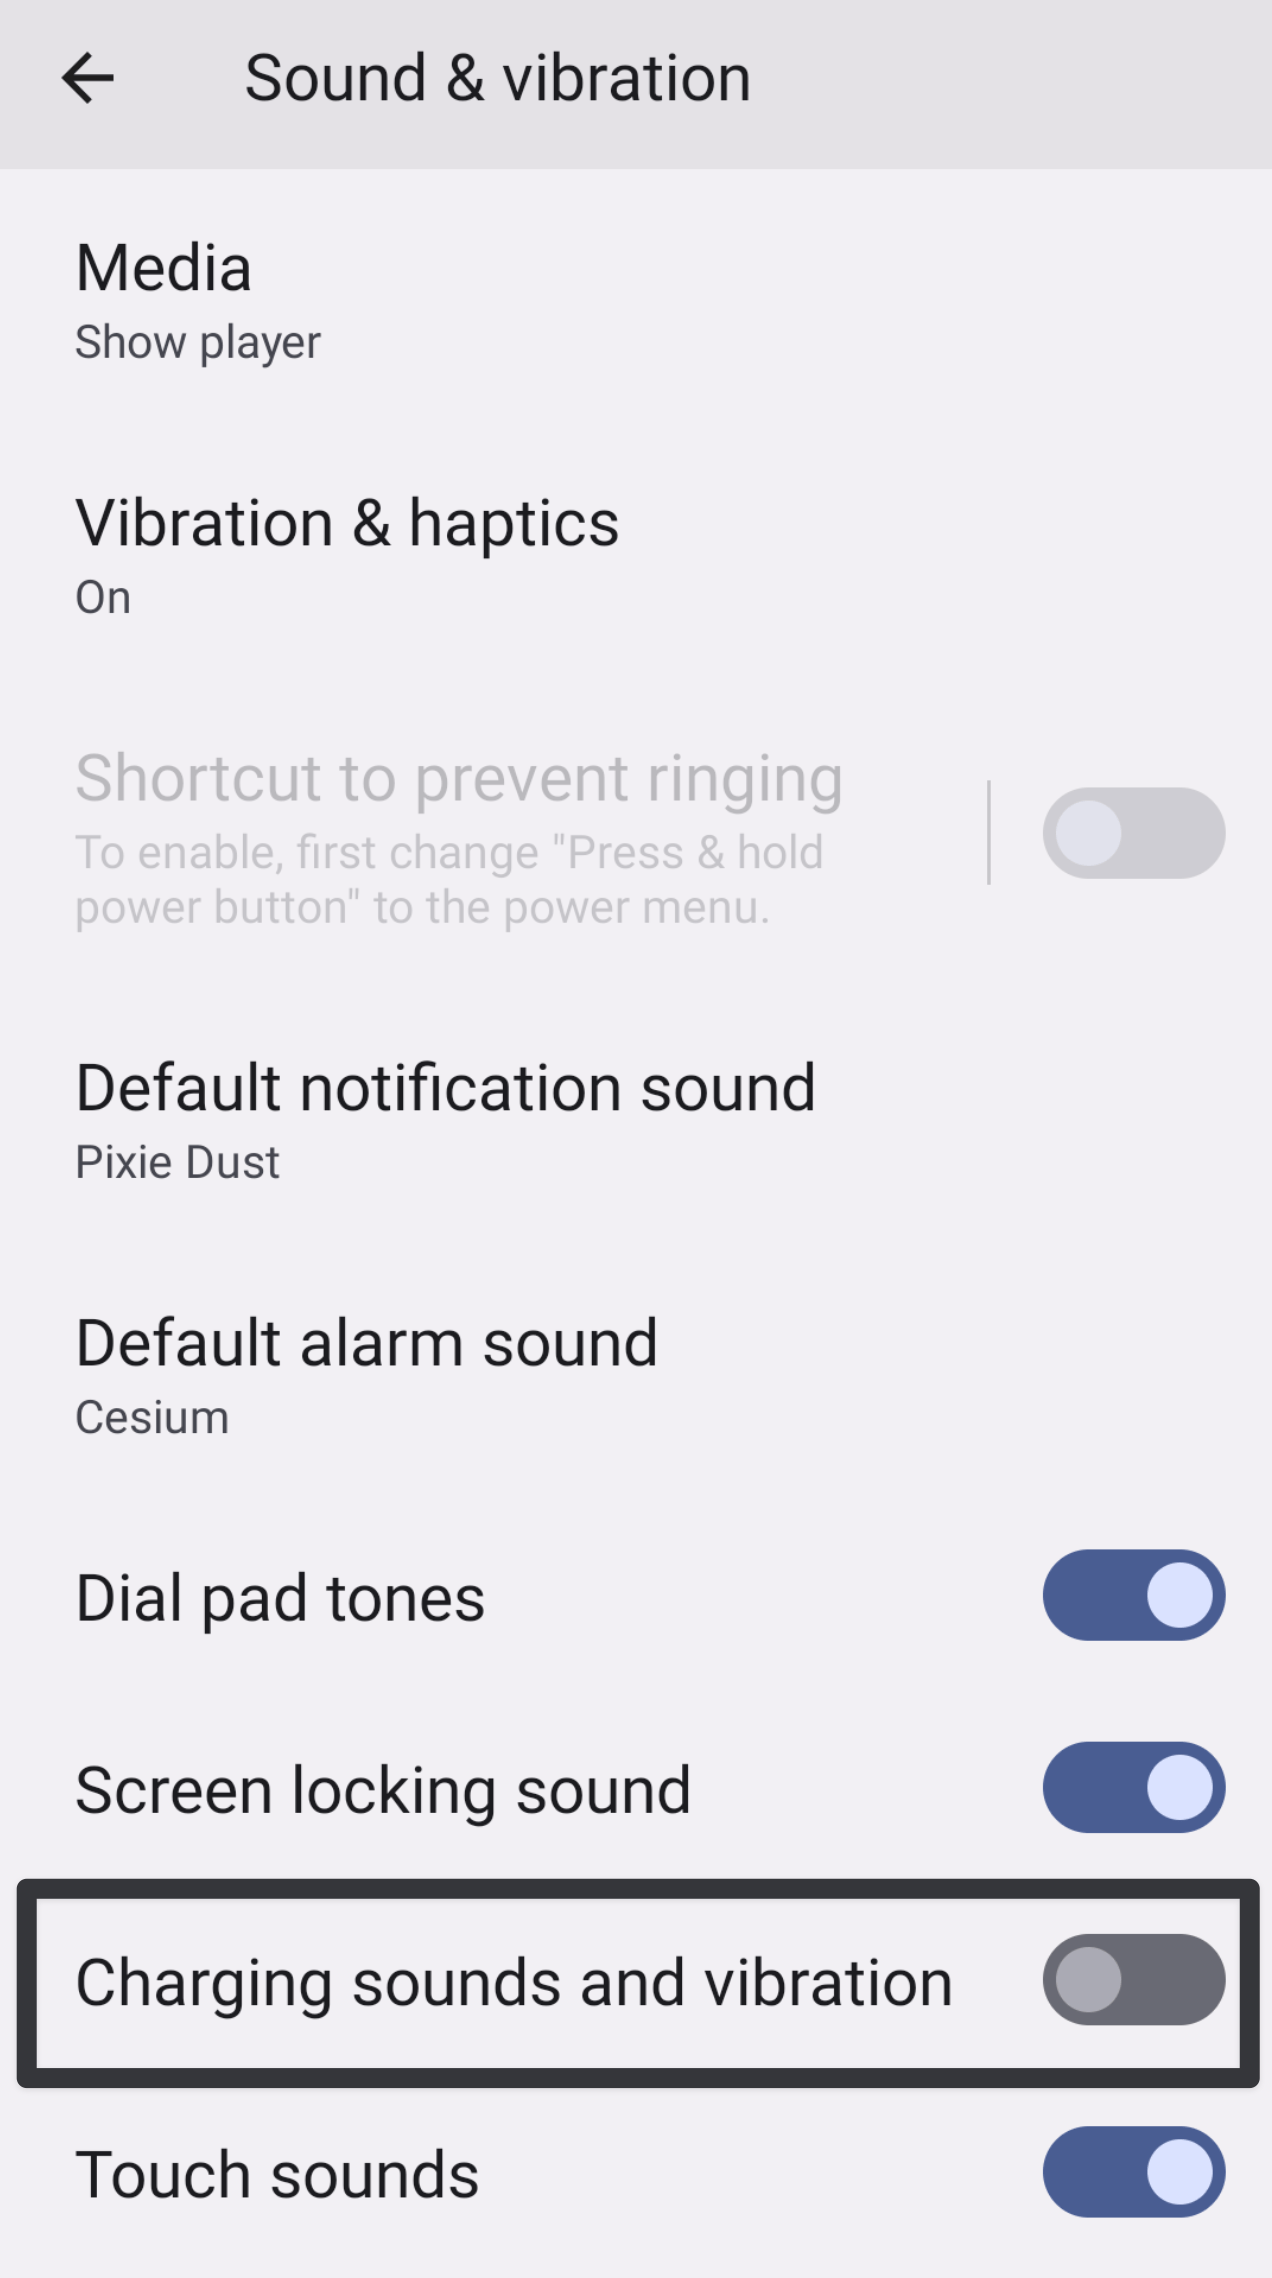 Turn off the charging sound of your Android phone